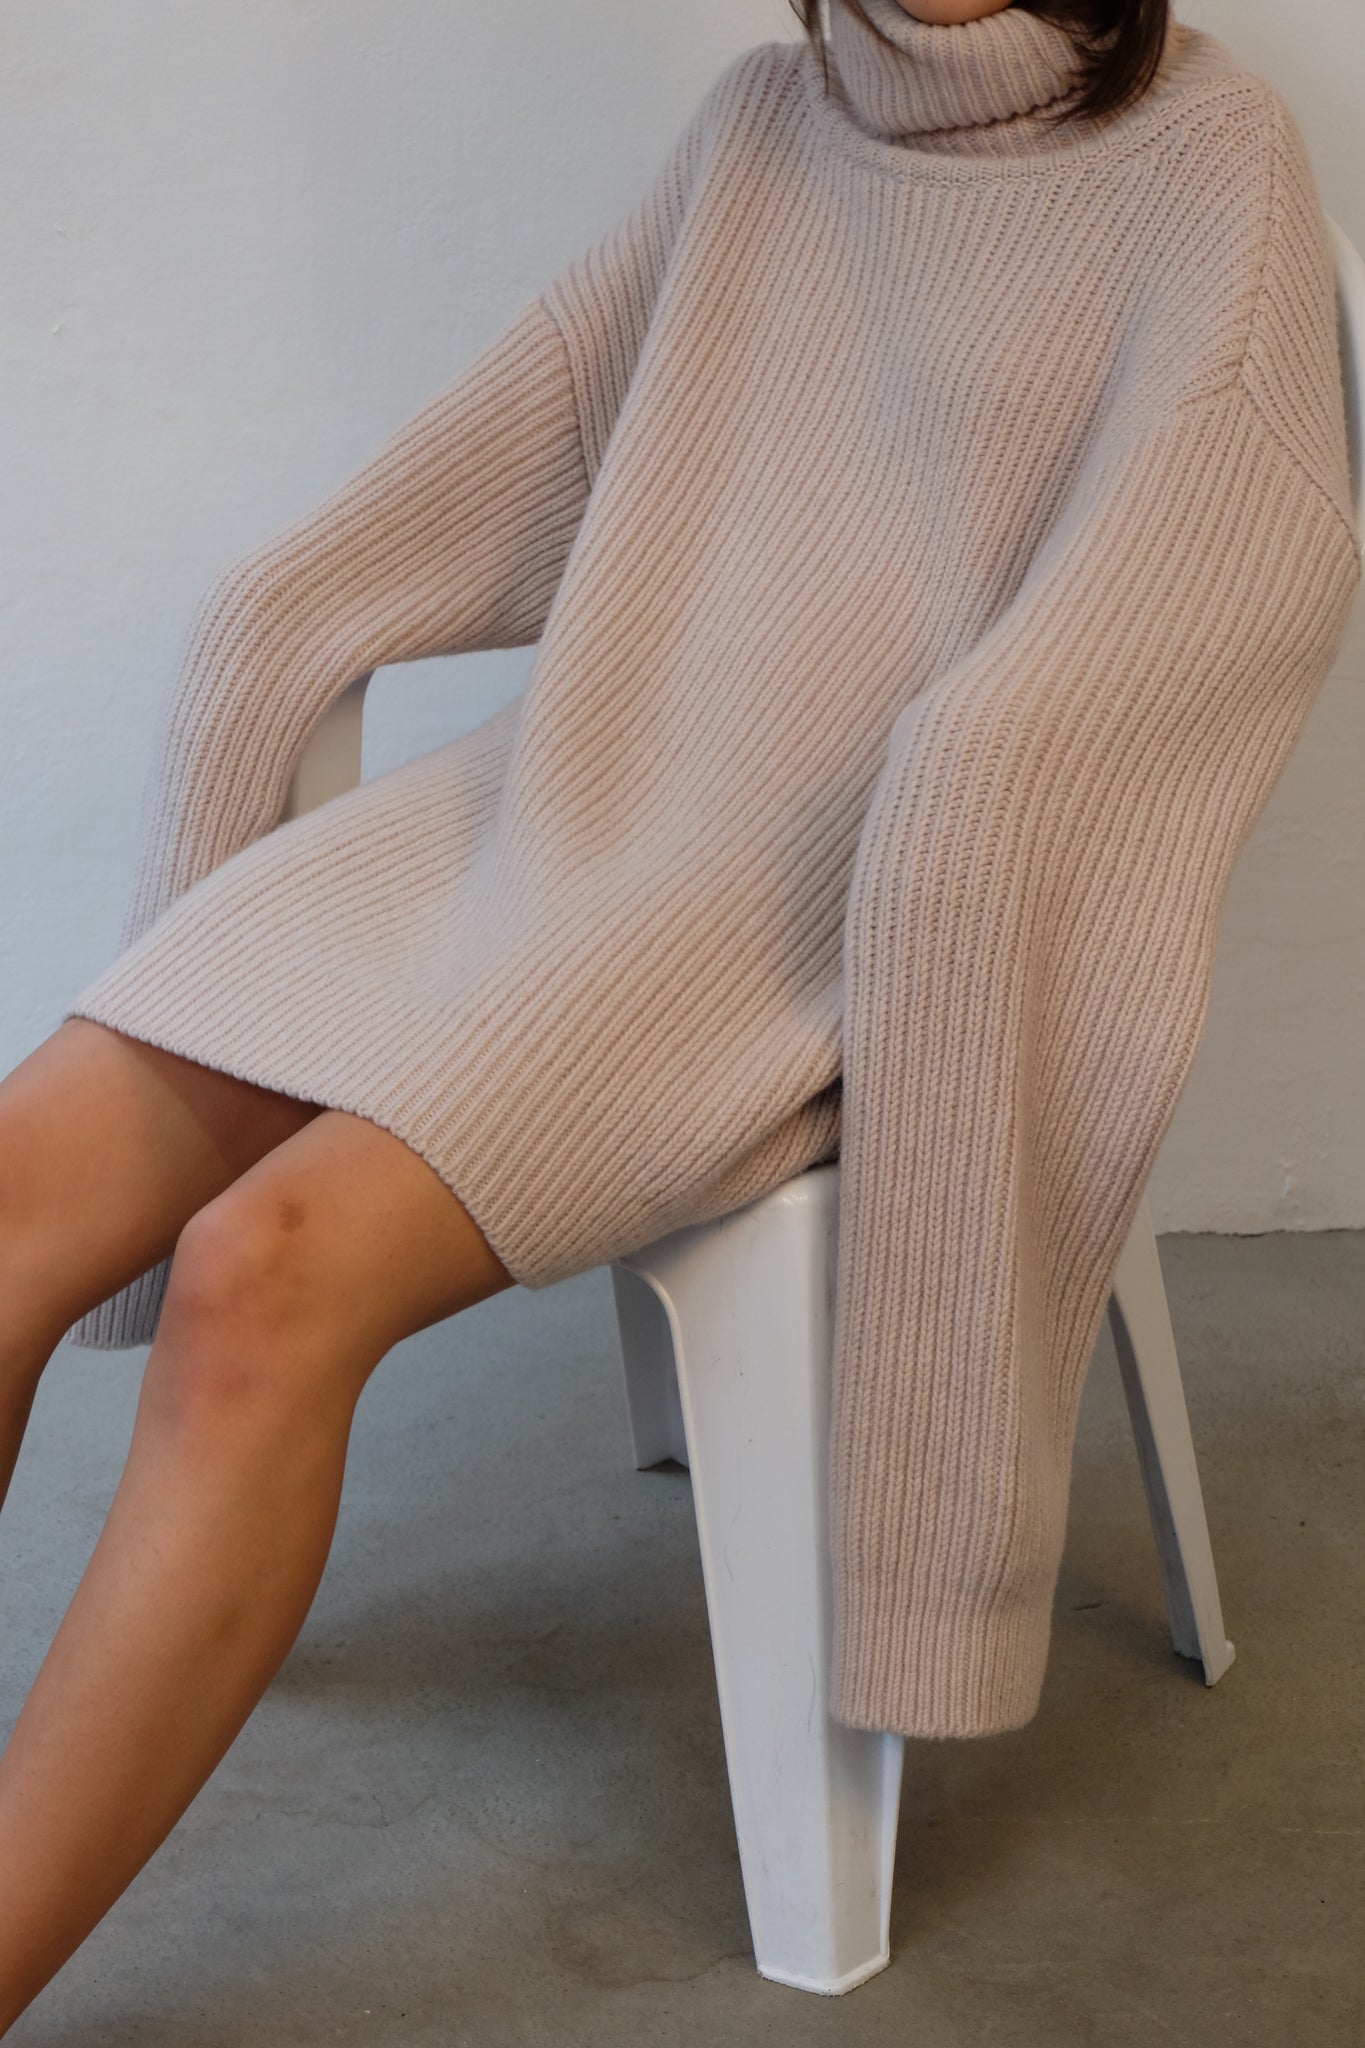 CHUNKY OVERSIZED RIB IN BEIGE PULLOVER BY CAN PEP REY